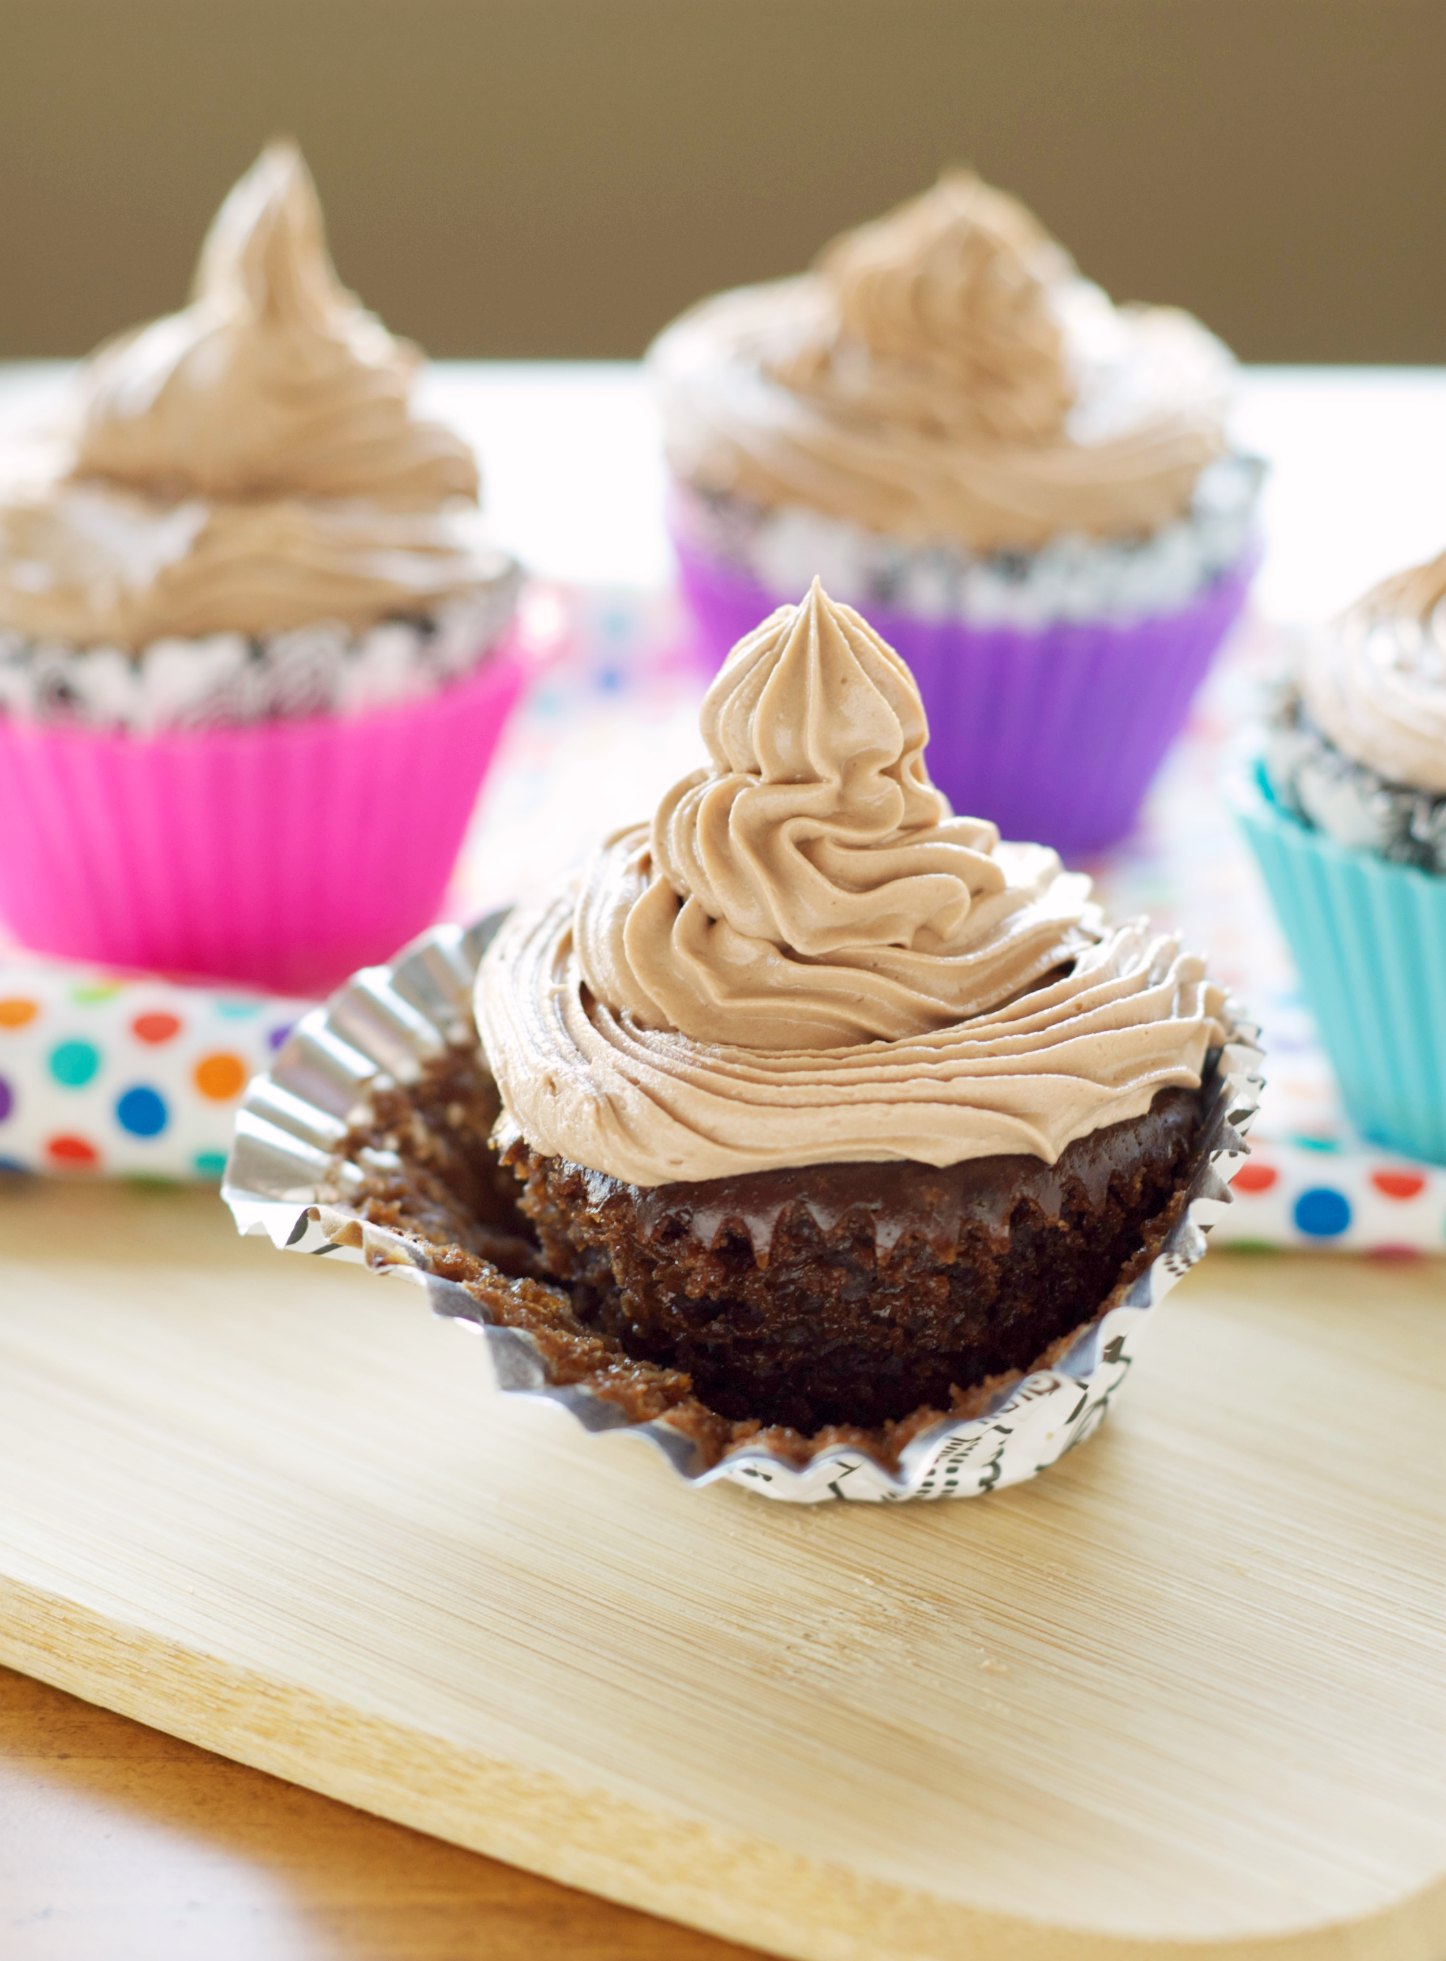 Hazelnut cupcake with several multicolored cupcakes in background